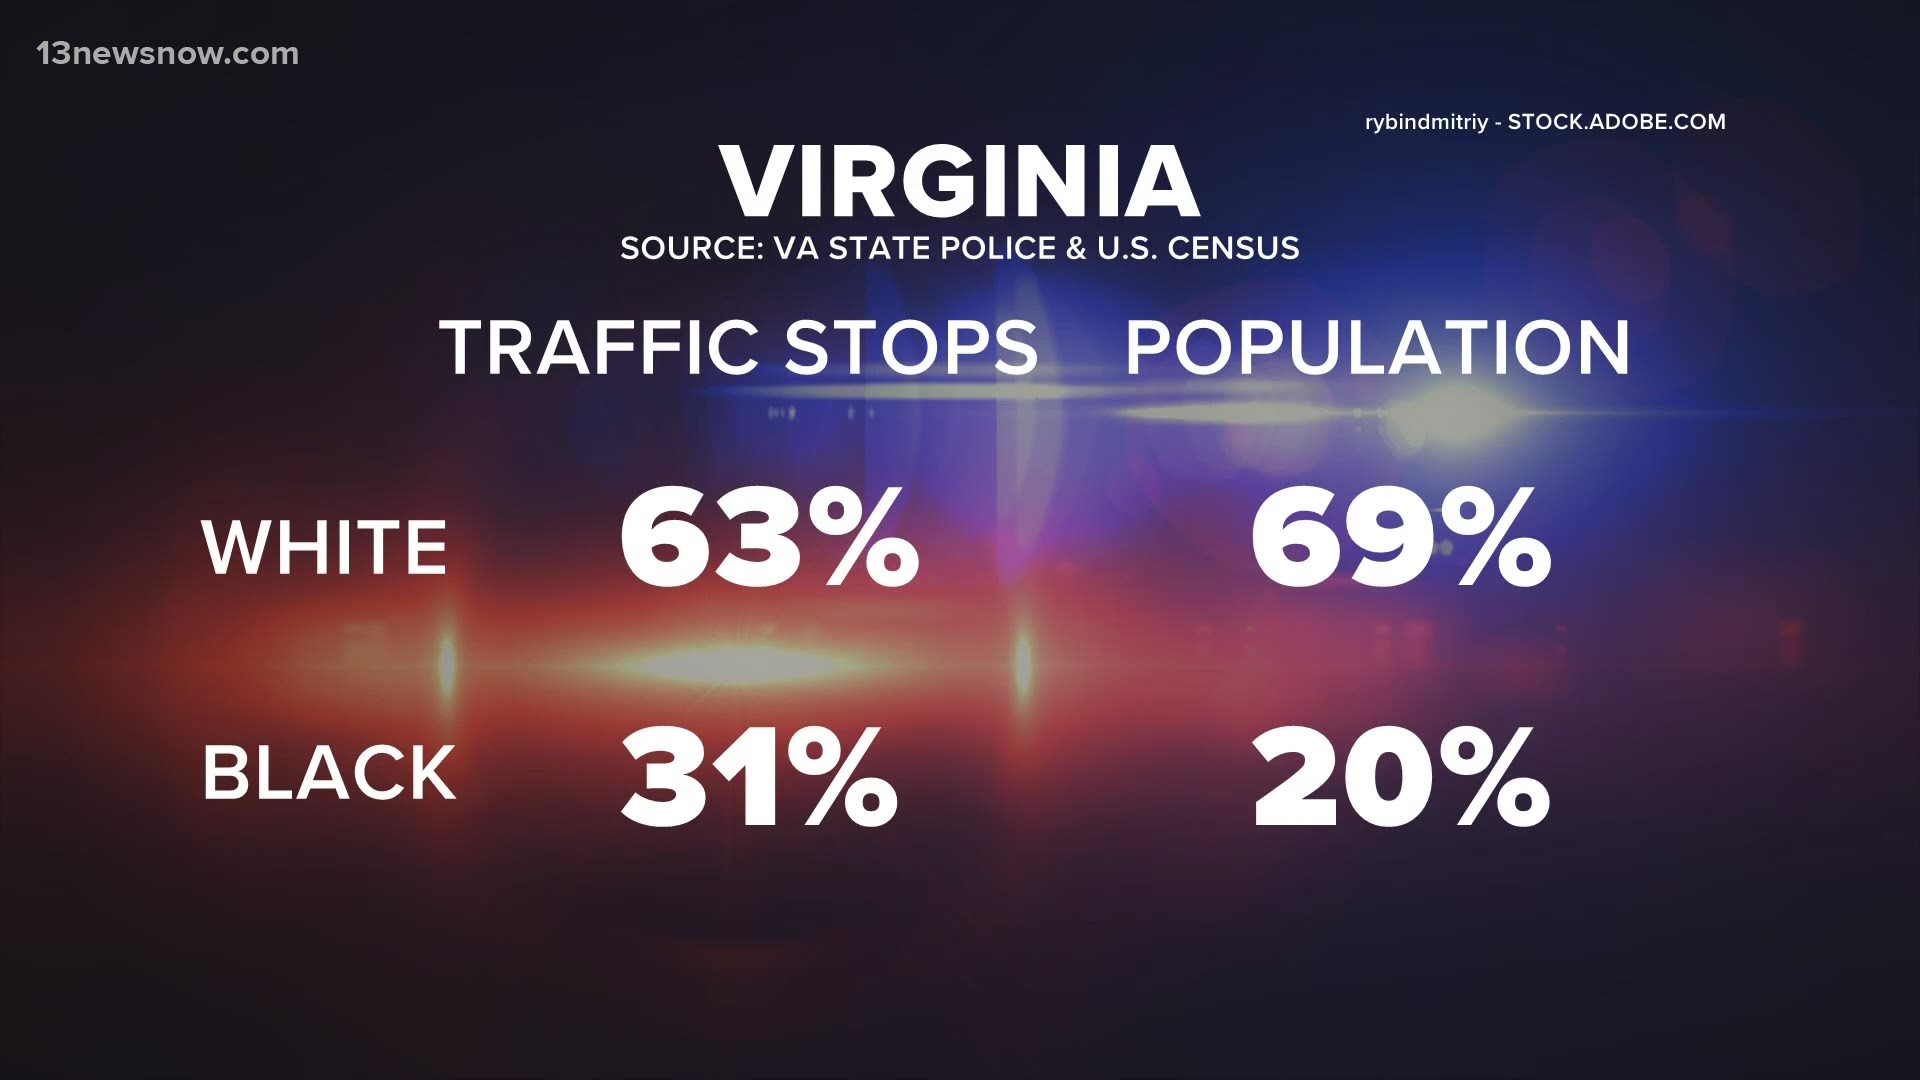 New data shows that in Virginia, African American drivers are pulled over at a higher rate than white drivers.